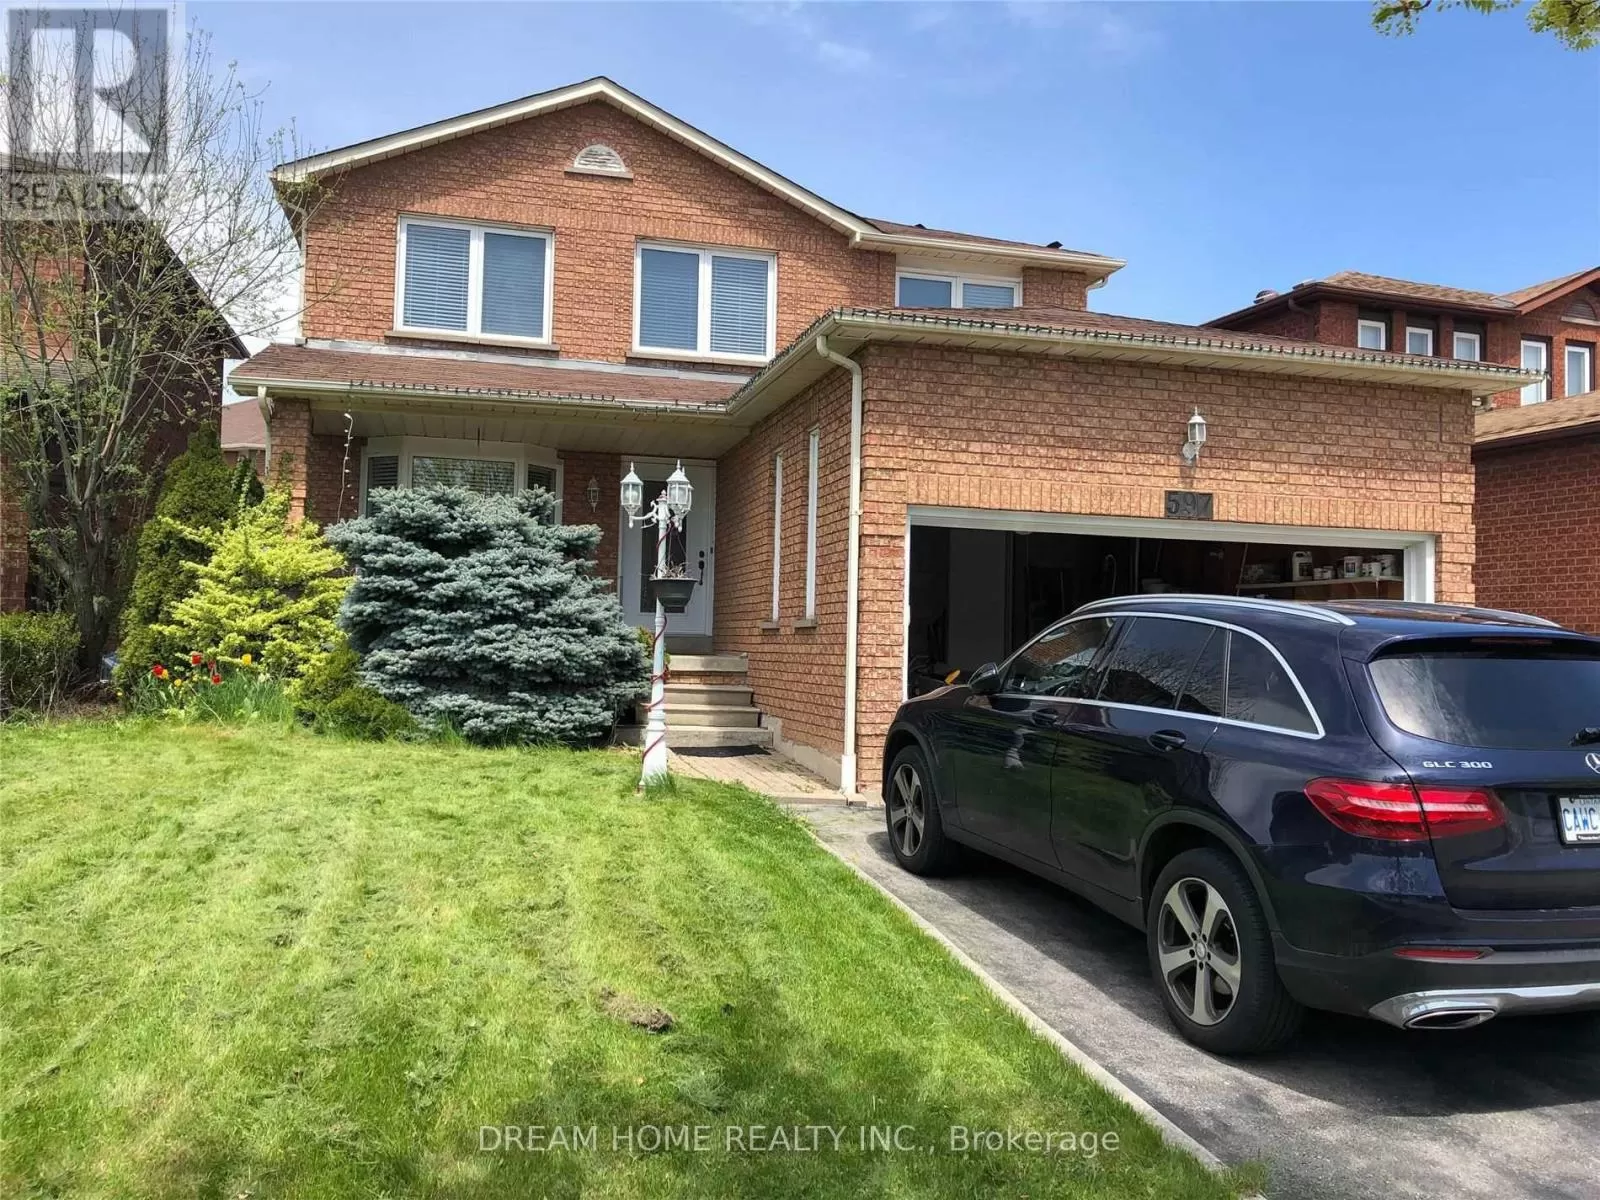 House for rent: Main - 597 Fairview Road W, Mississauga, Ontario L5B 3X3